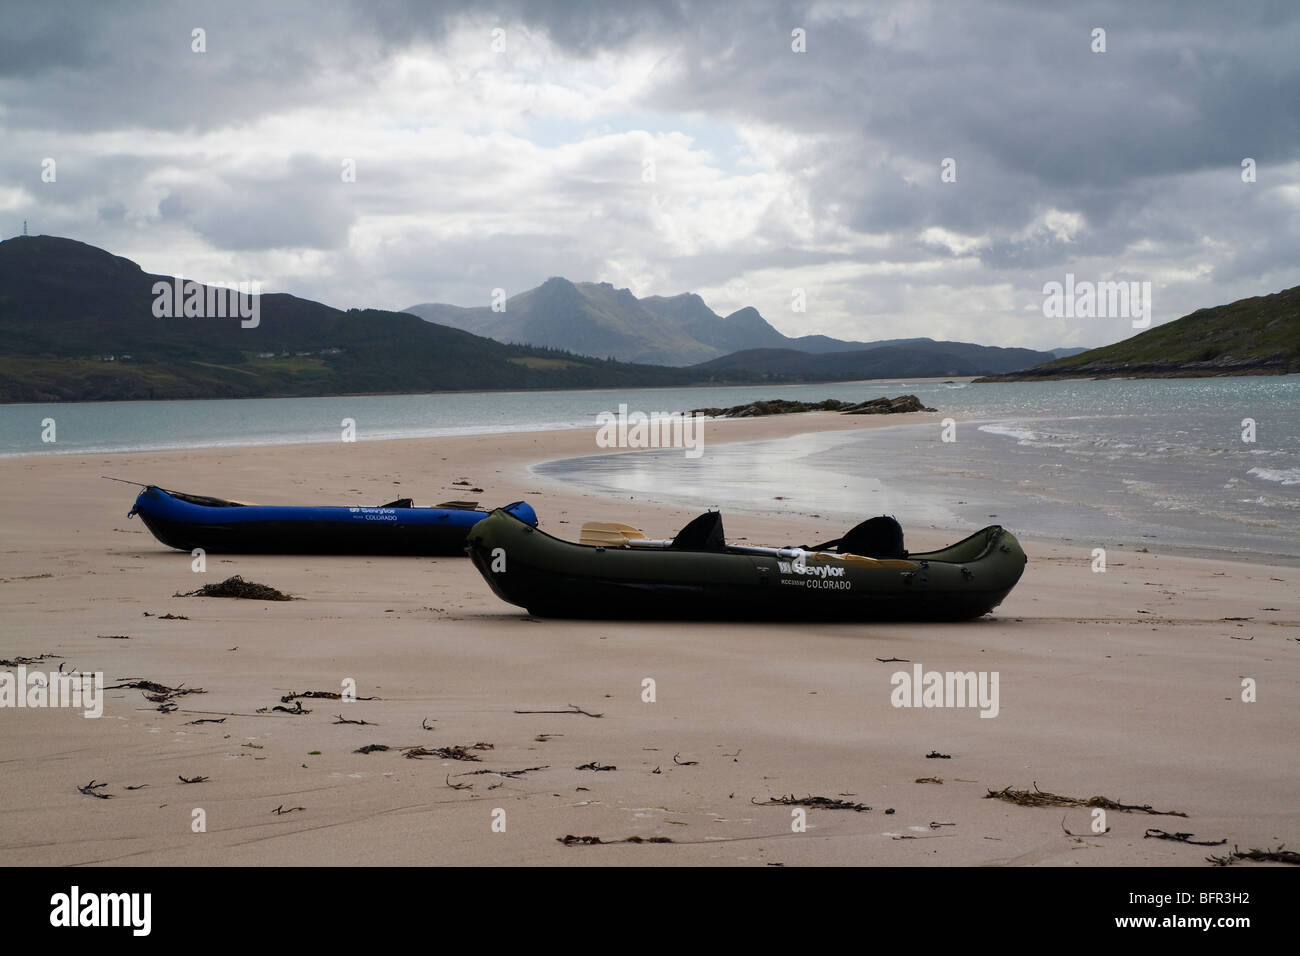 Two Sevylor Inflatable canoes on a spit of beach extending from Rabbit Islands, Tongue Bay near Tongue, Lairg, Scotland Stock Photo